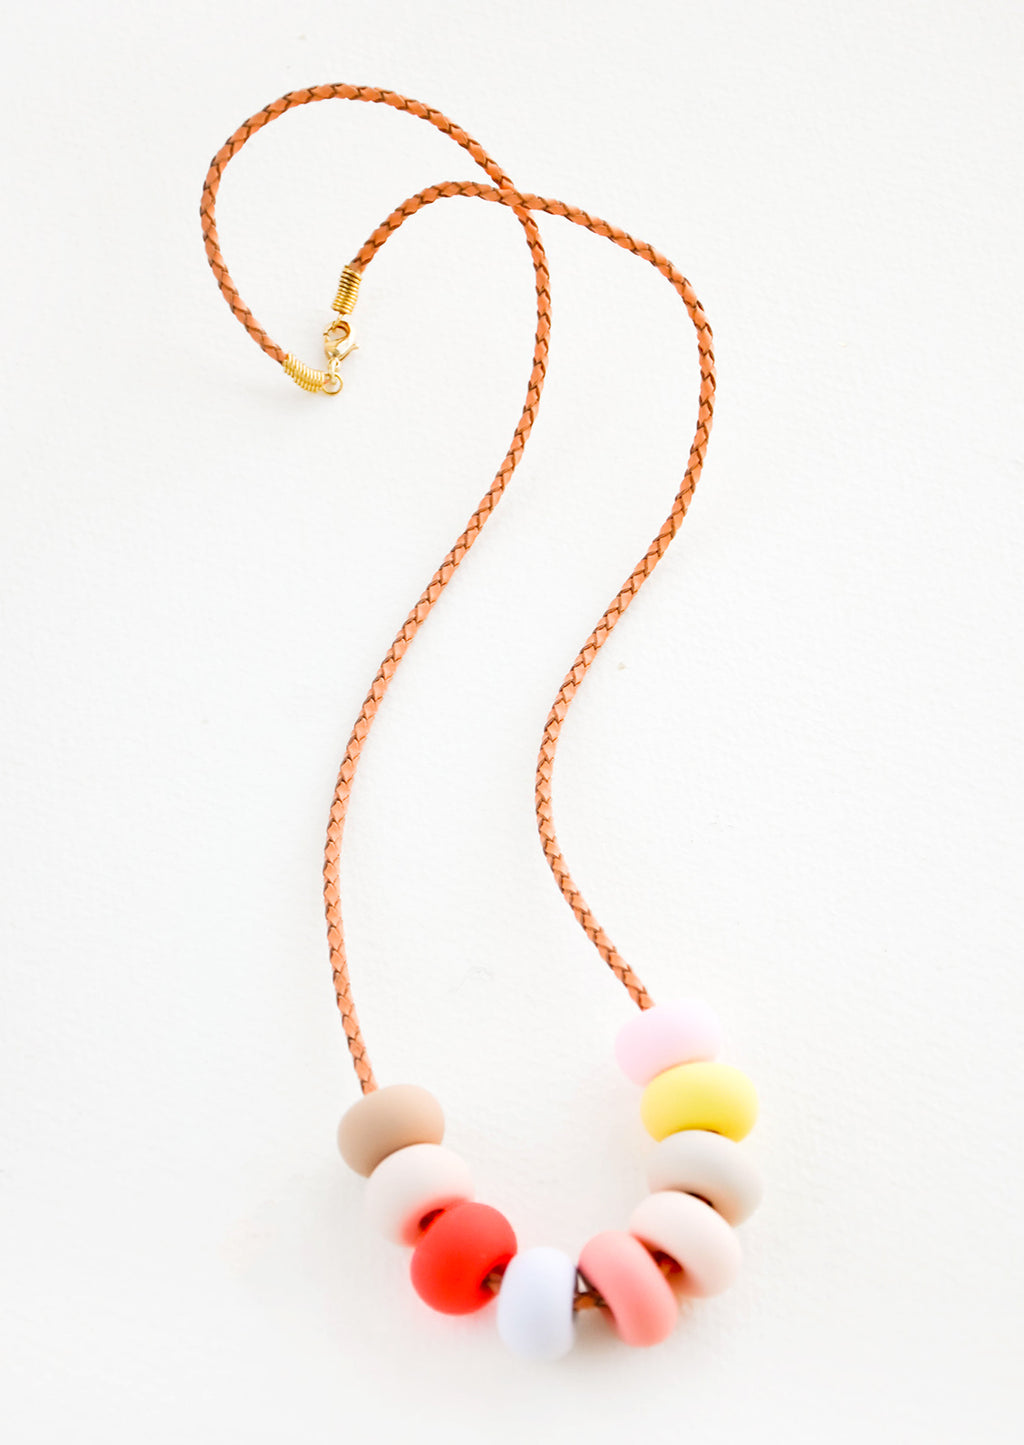 Italian Ice: Woven leather cord necklace with gold clasp and rounded clay beads tans, pinks, red, blue, and yellow.